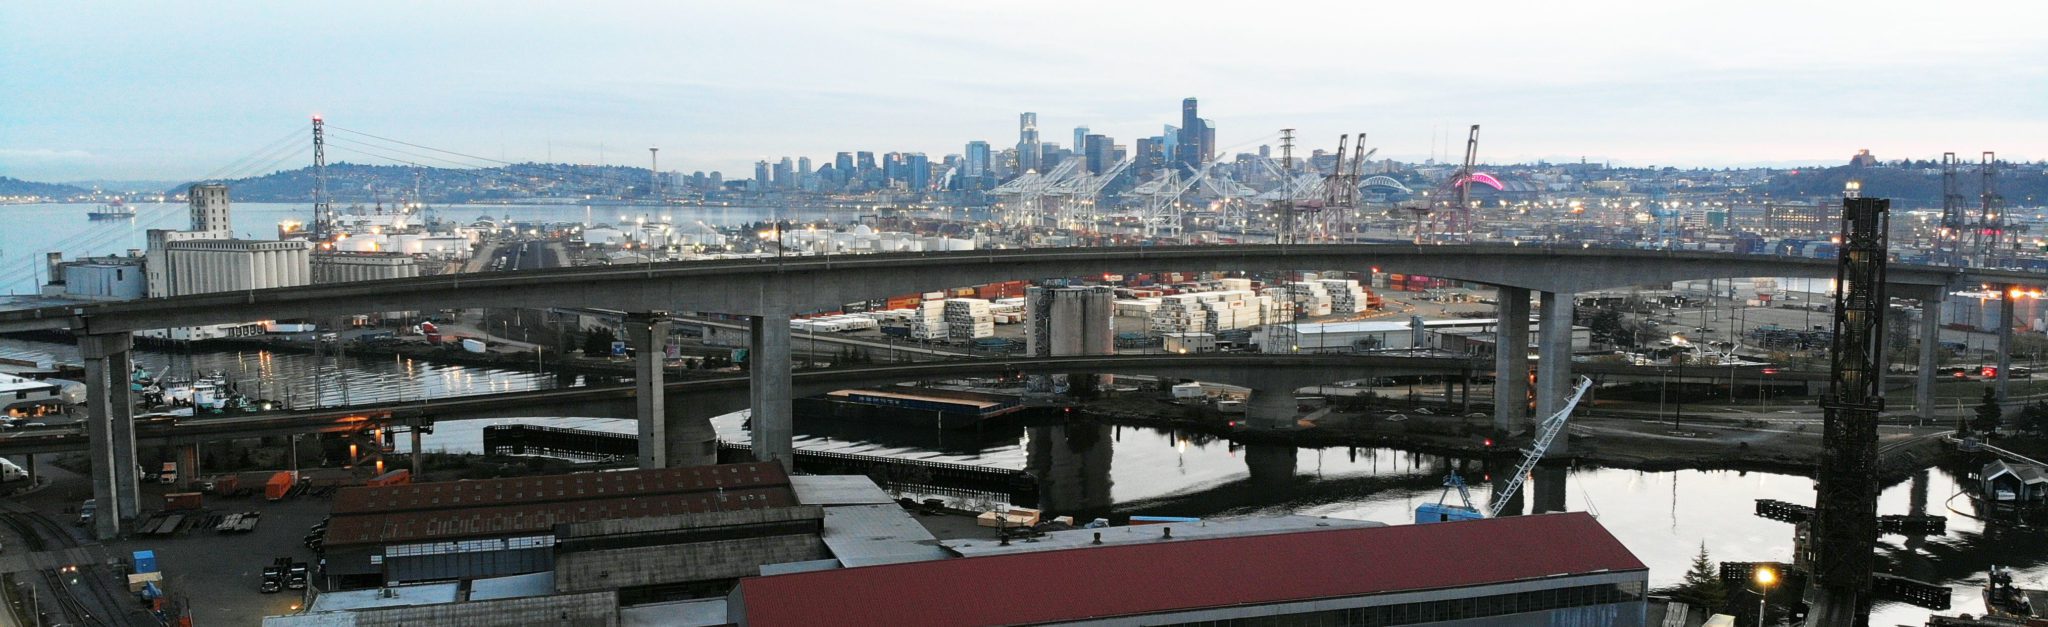 The West Seattle Bridge, with the city of Seattle visible in the background. The Duwamish Waterway and Port of Seattle equipment are also in the photo.